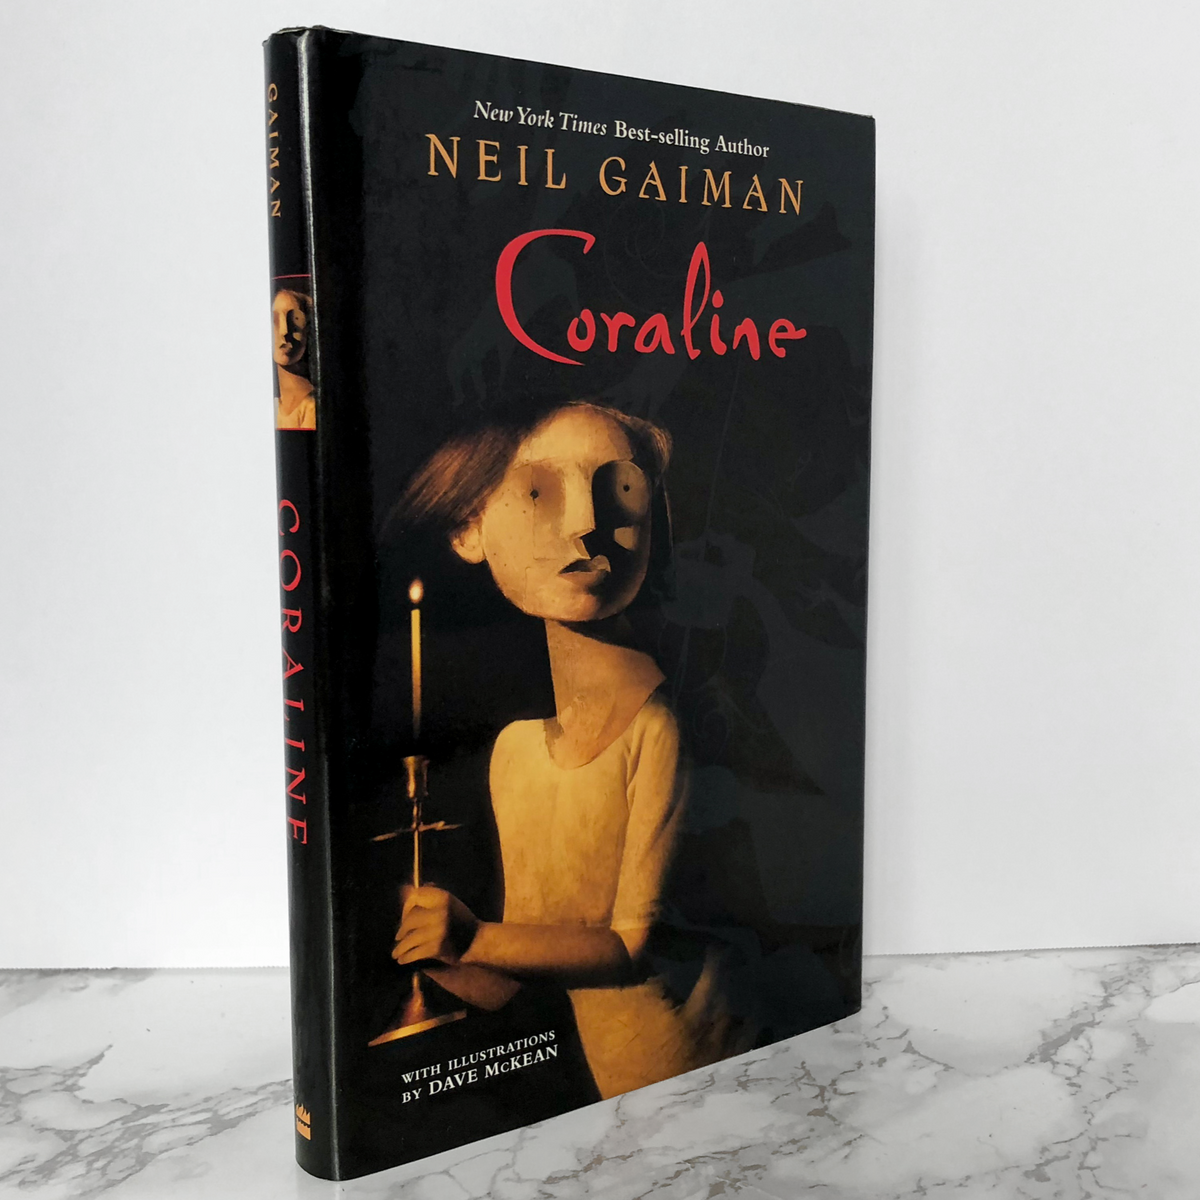 Coraline by Neil Gaiman, First Edition and Twenty Third Printing,  Illustrated by Dave Mckean, Published 2002 by Harpercollins 